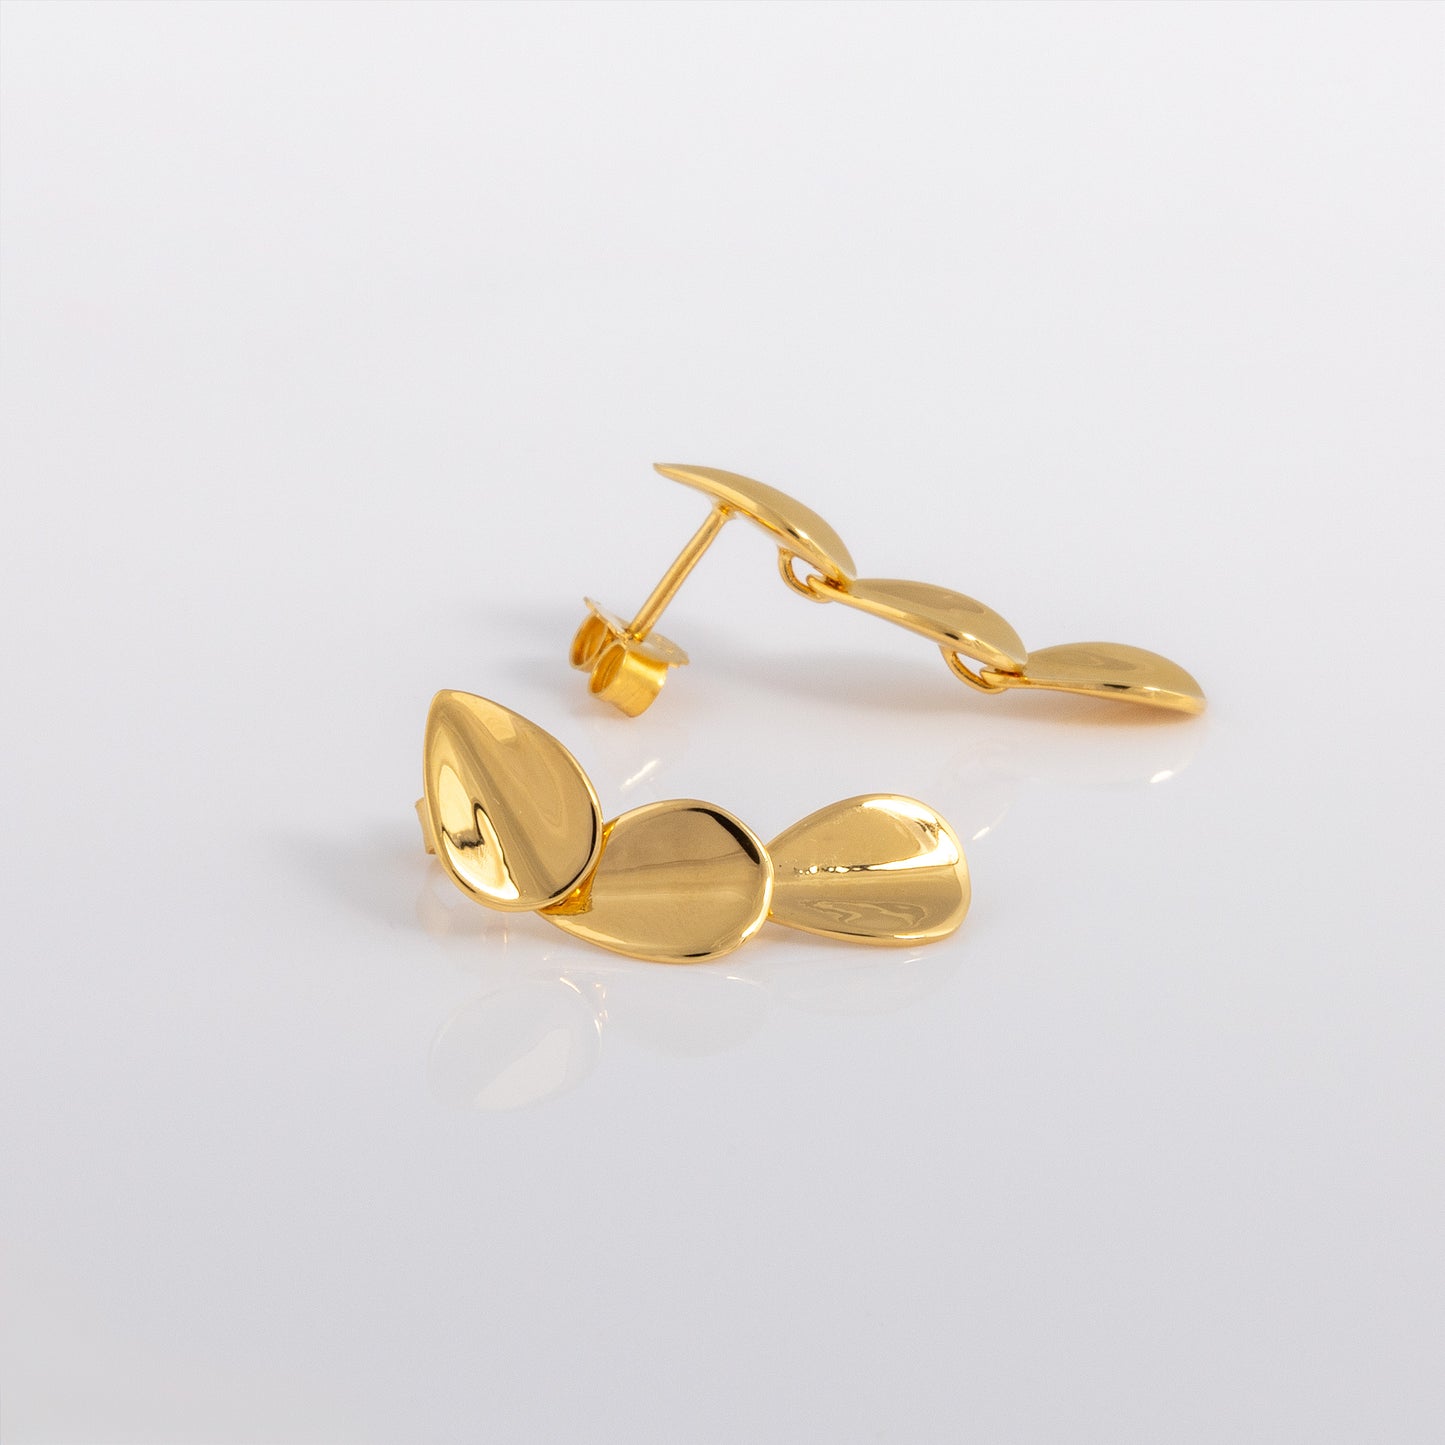 Dangly Stud Earrings with Three Gold Vermeil Falling Drops